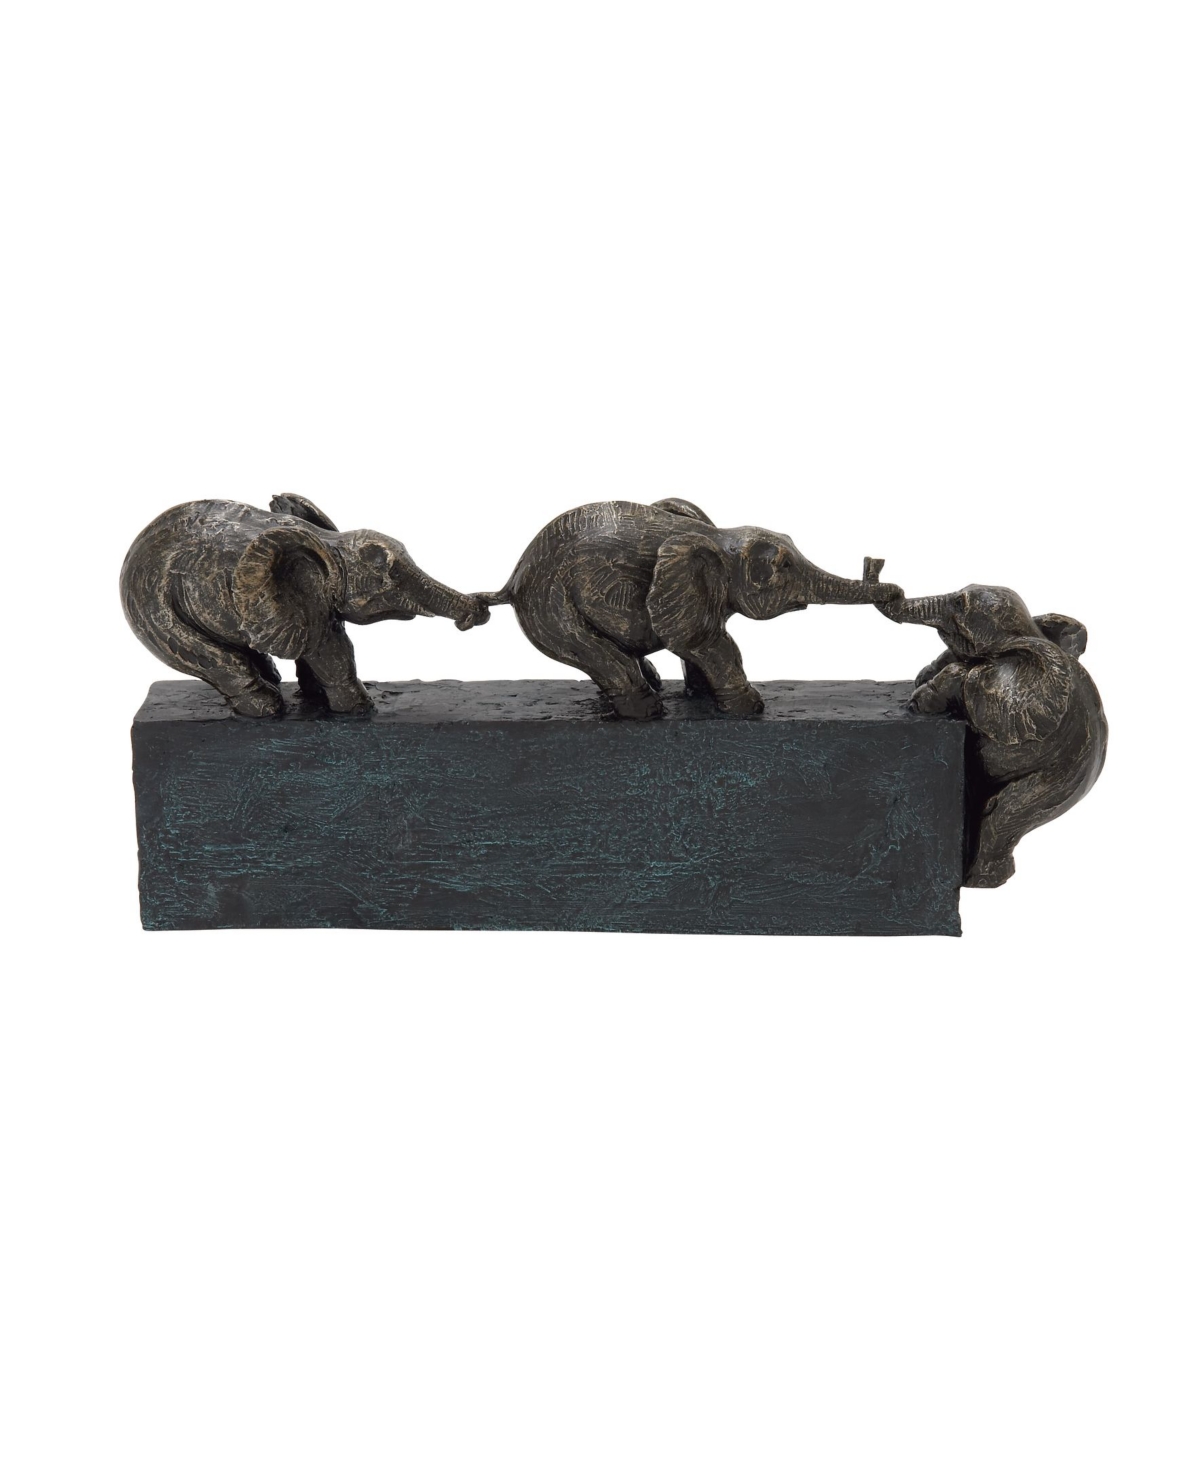 Rosemary Lane Eclectic Elephant Sculpture, 8" X 17" In Black